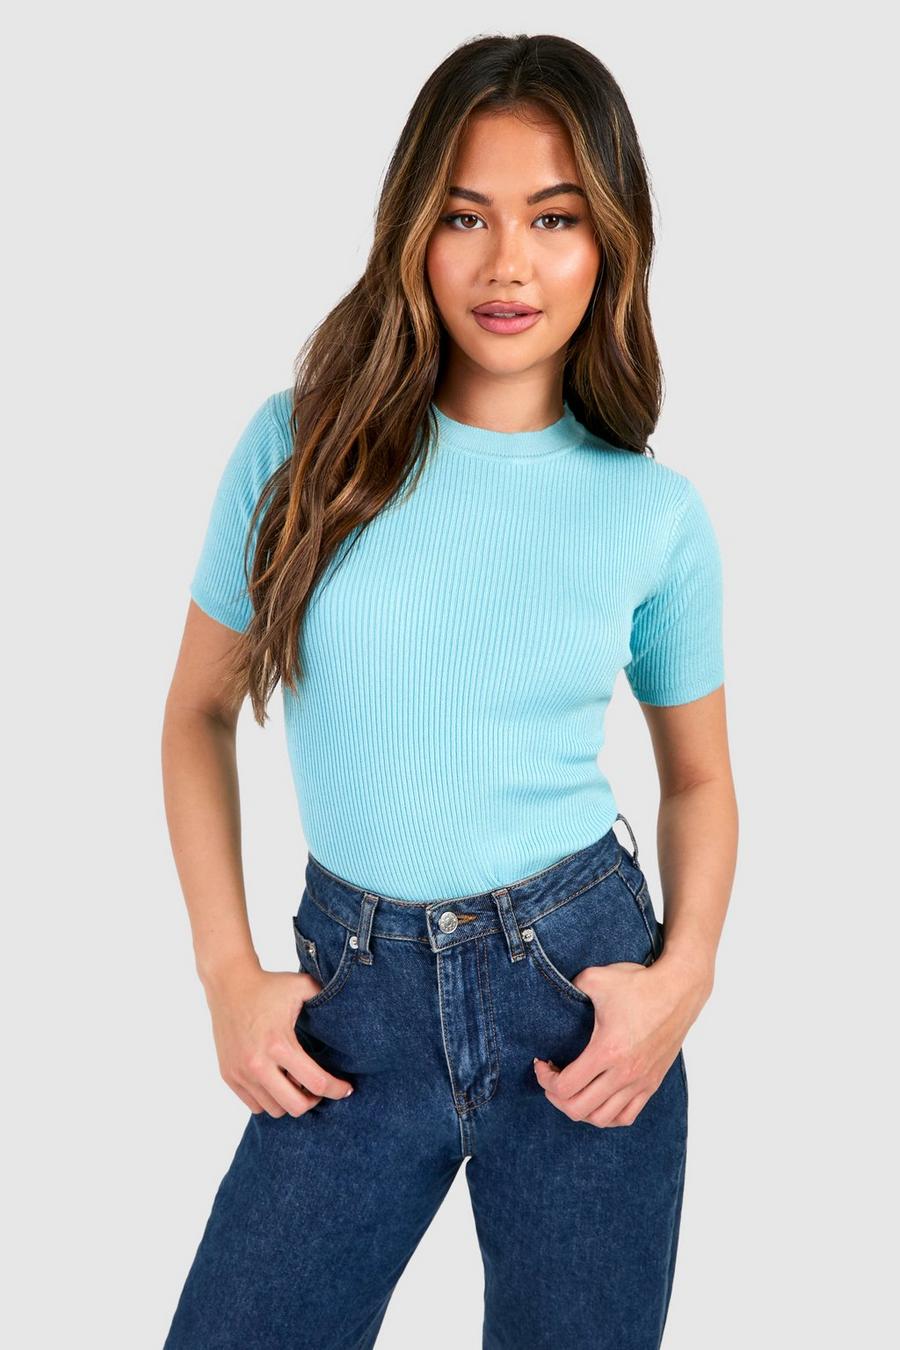 Shop Women's Knit Tops Online, Knitted Shirts & Tees